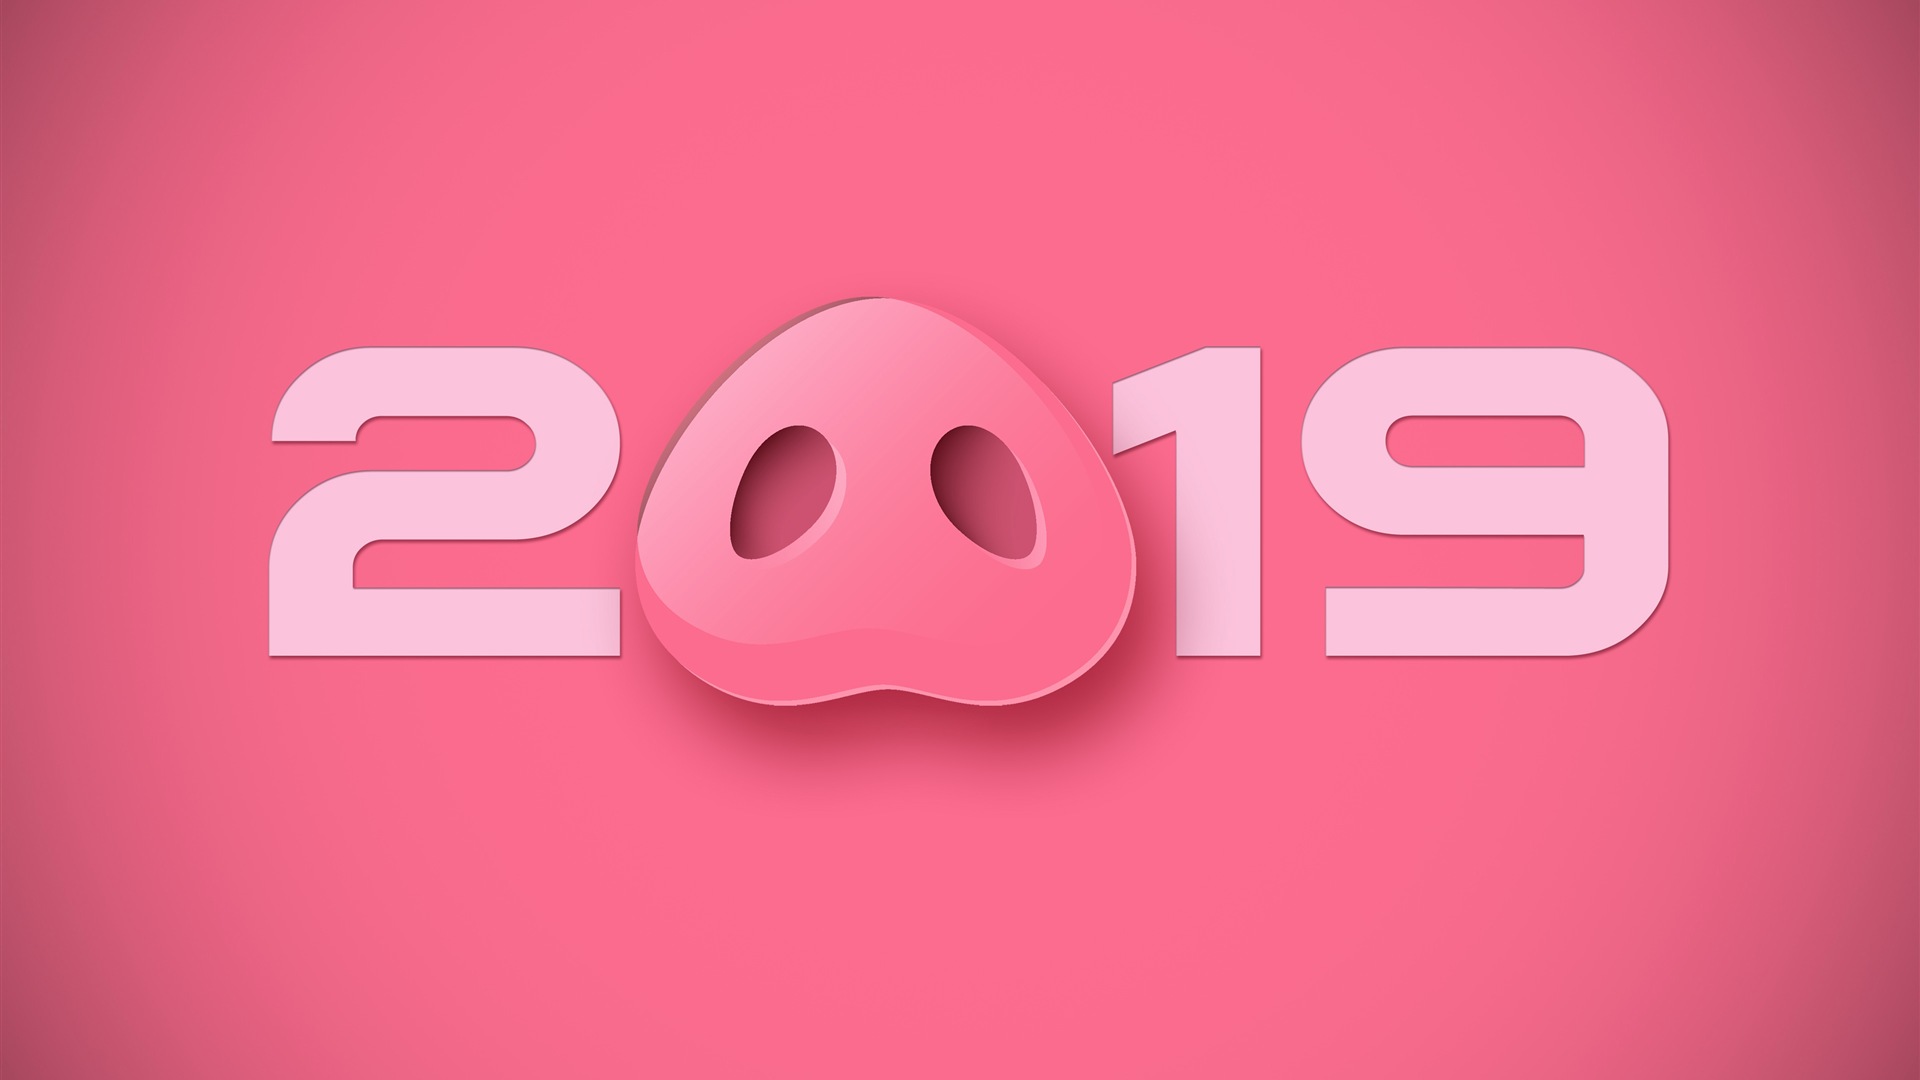 Happy New Year 2019 HD wallpapers #14 - 1920x1080